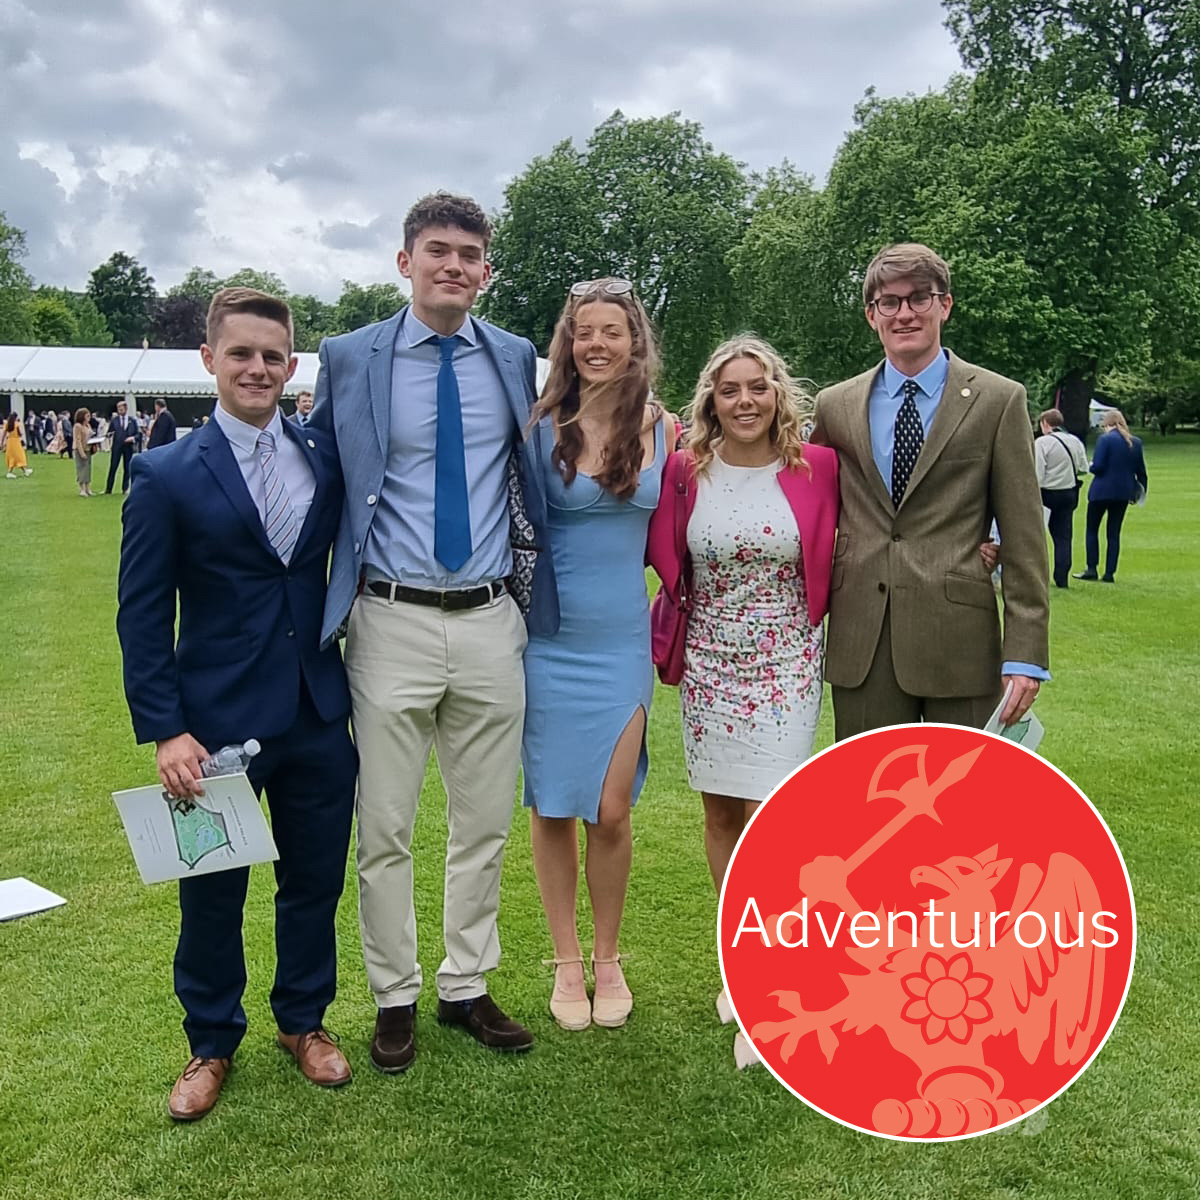 Huge congratulations to our Old Rendcombians who collected their long awaited Gold Duke of Edinburgh awards from Buckingham Palace this week. O Beckett, J Carr, A Frost, E Musgrave, L Dale-Henderson - Very Well Done! #dofe #dukeofedinburghaward #dofegold #Adventurous #lifeskills